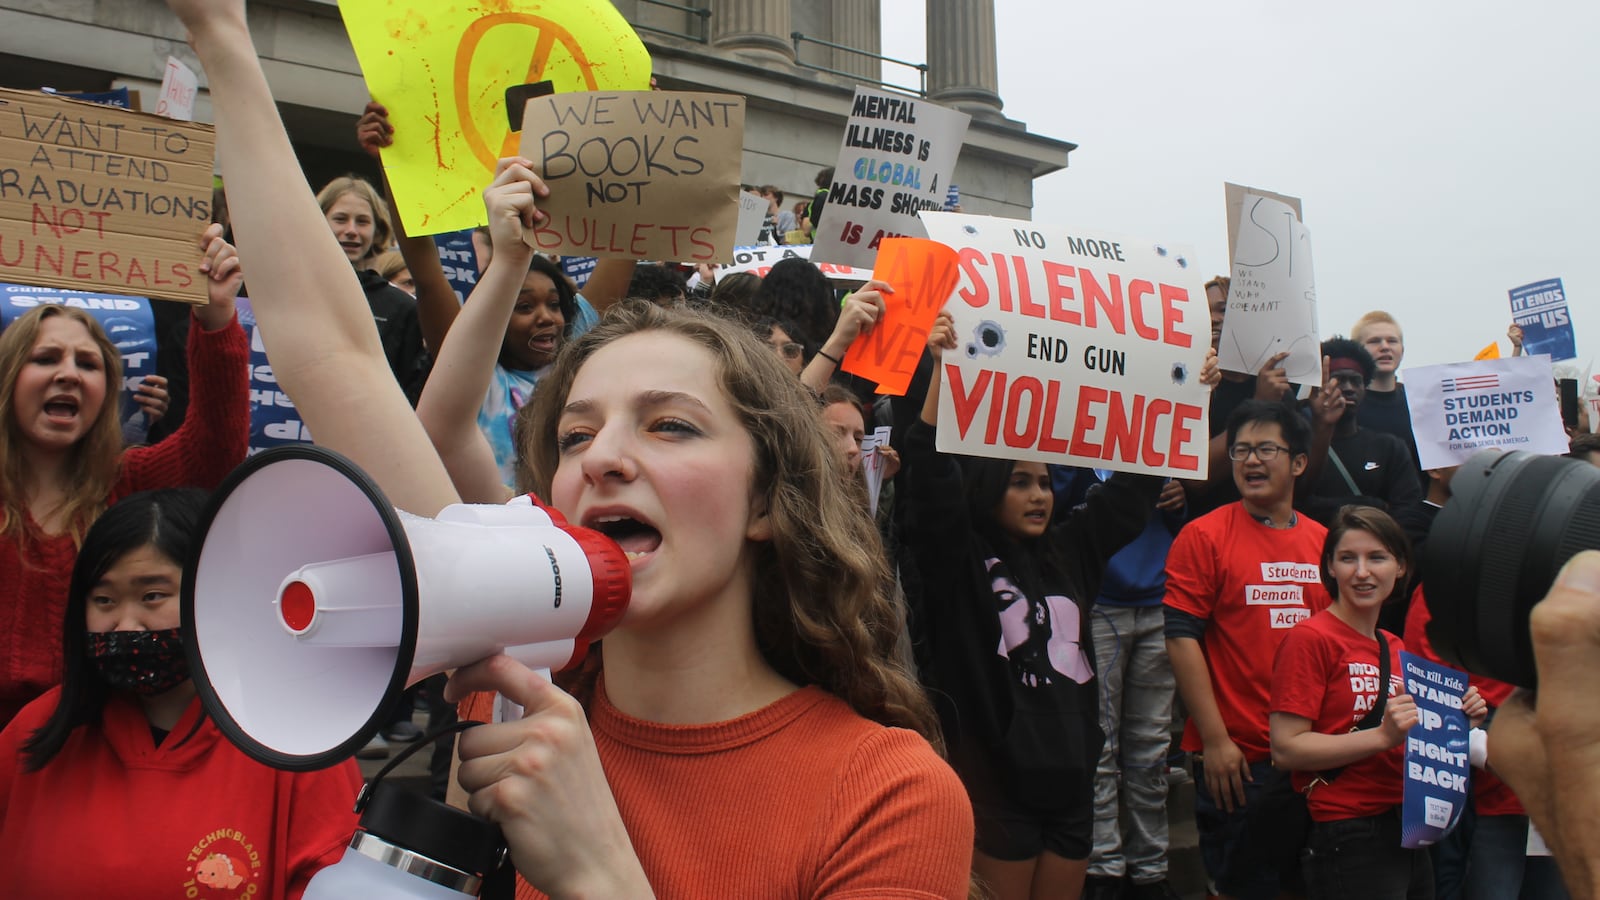 A girl yells into a megaphone surrounded by students holding signs on the steps of a large building.